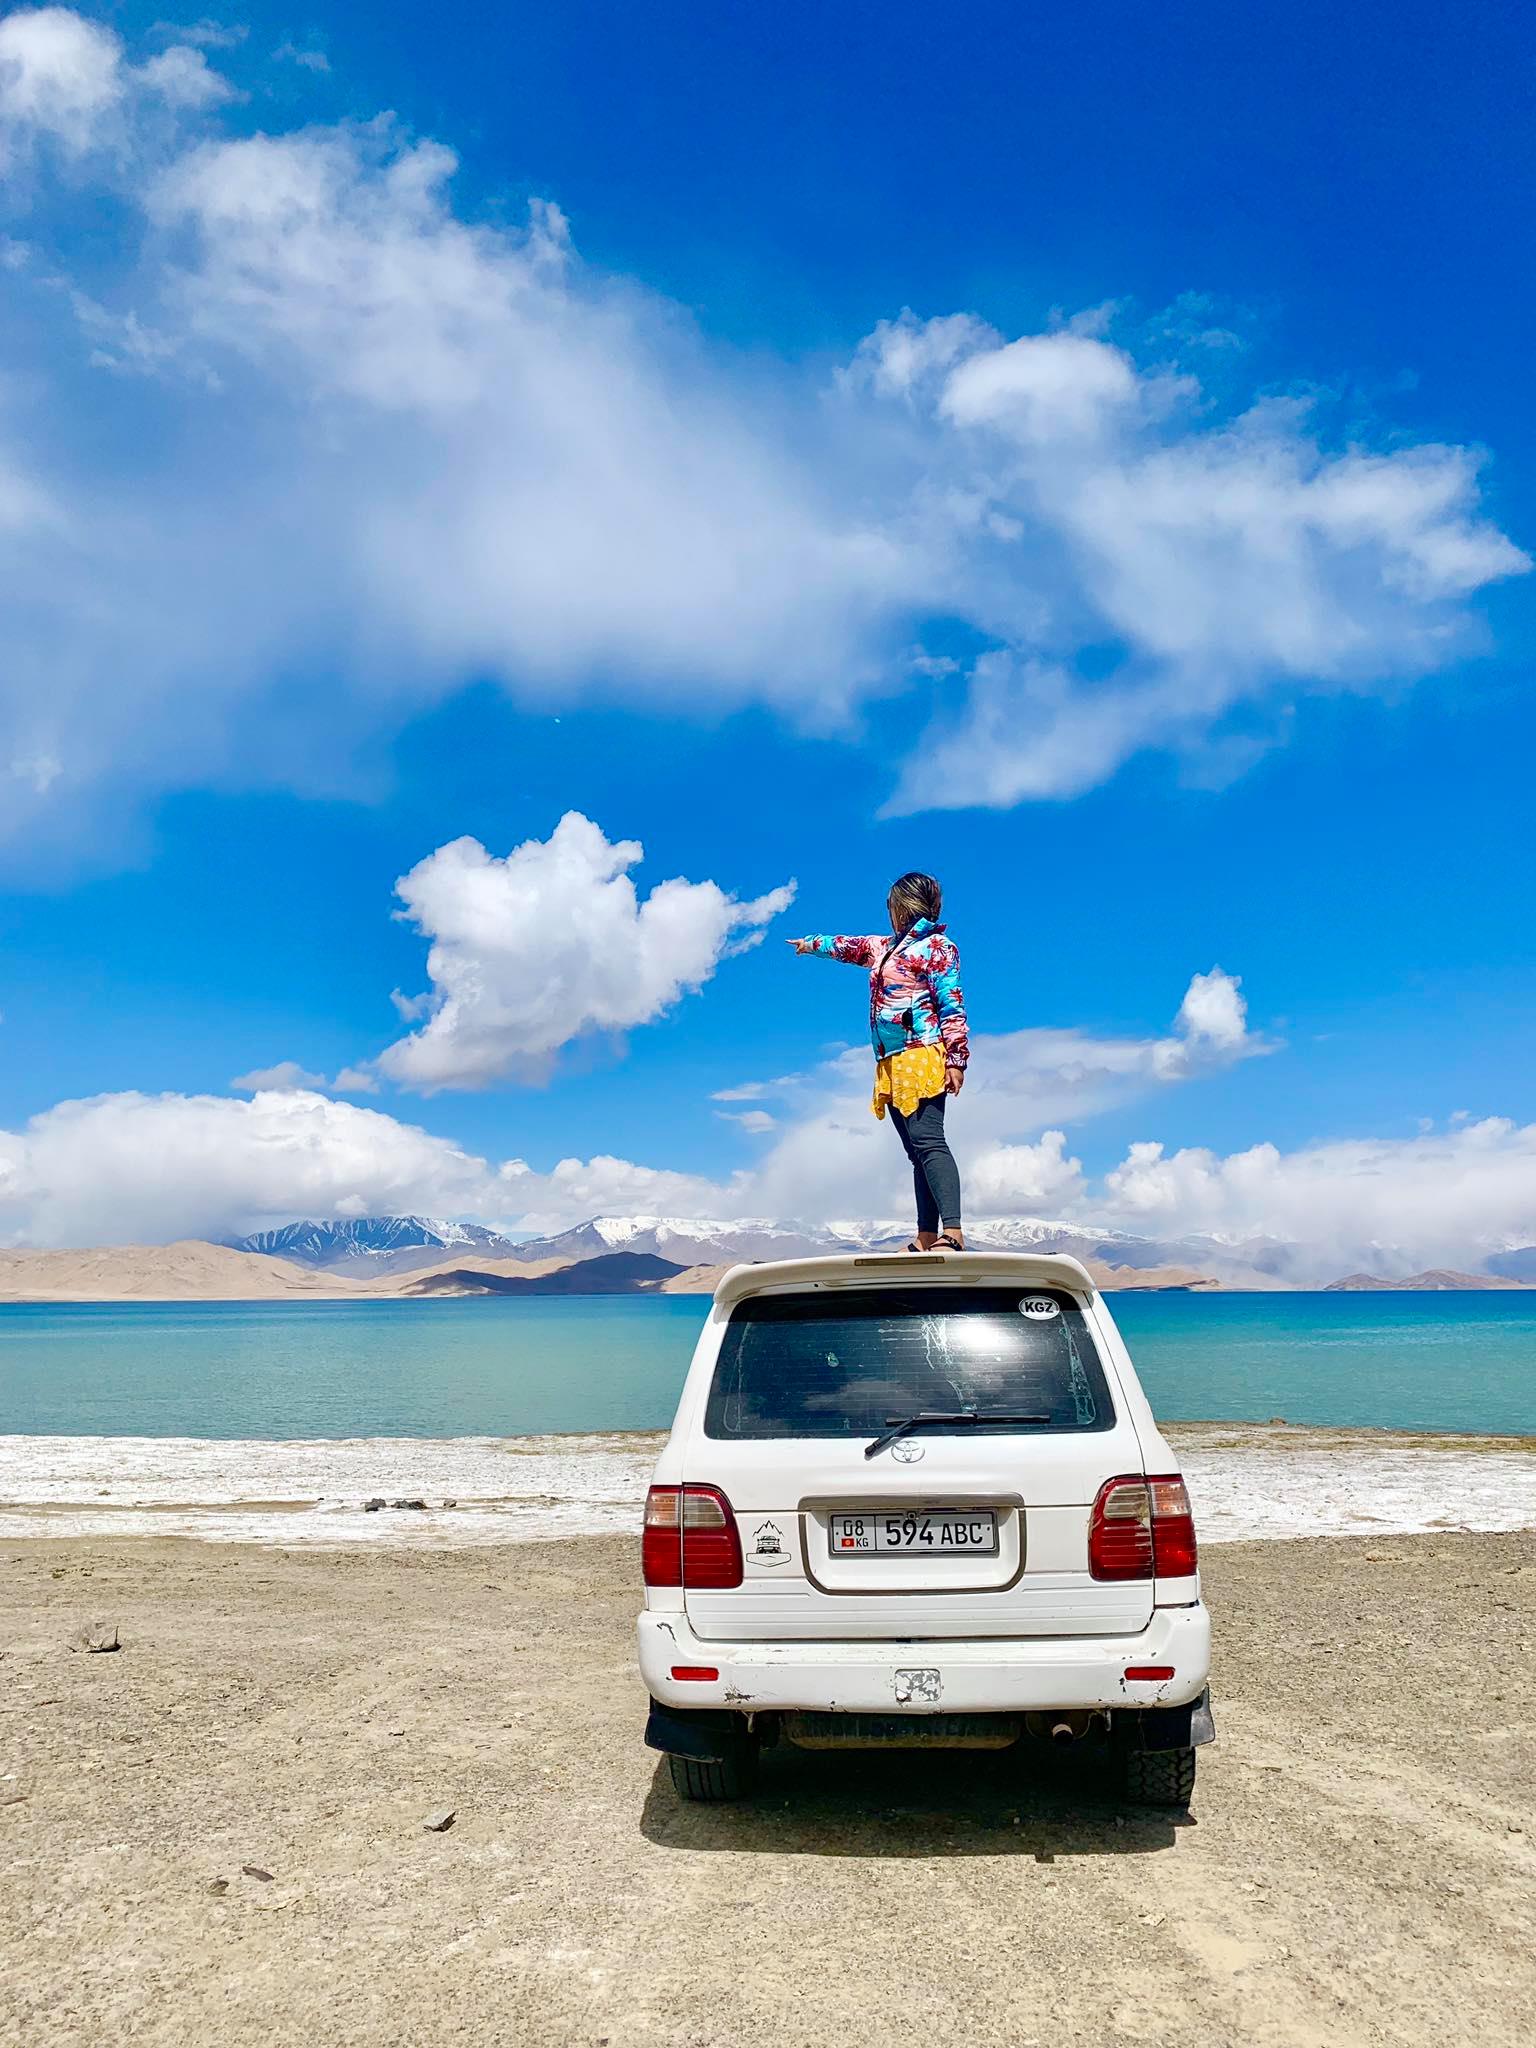 Kach Solo Travels in 2019 Last 8 days of Pamir Highway roadtrip with Paramount Journey6.jpg